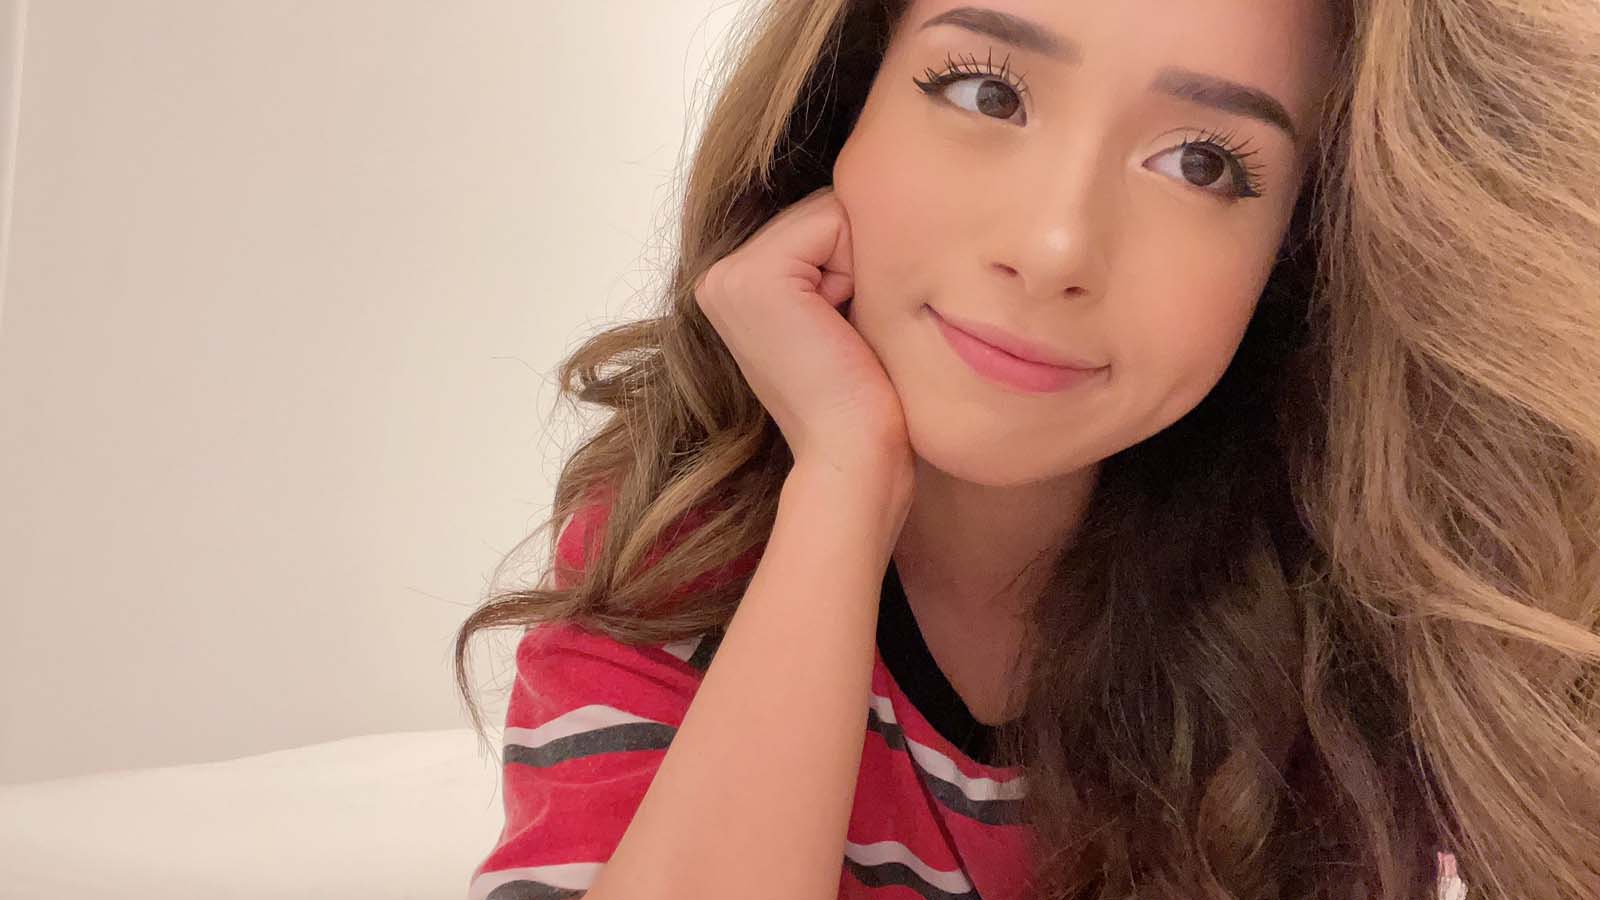 Pokimane fans left worried after Twitch star admits she's ready to "give up"